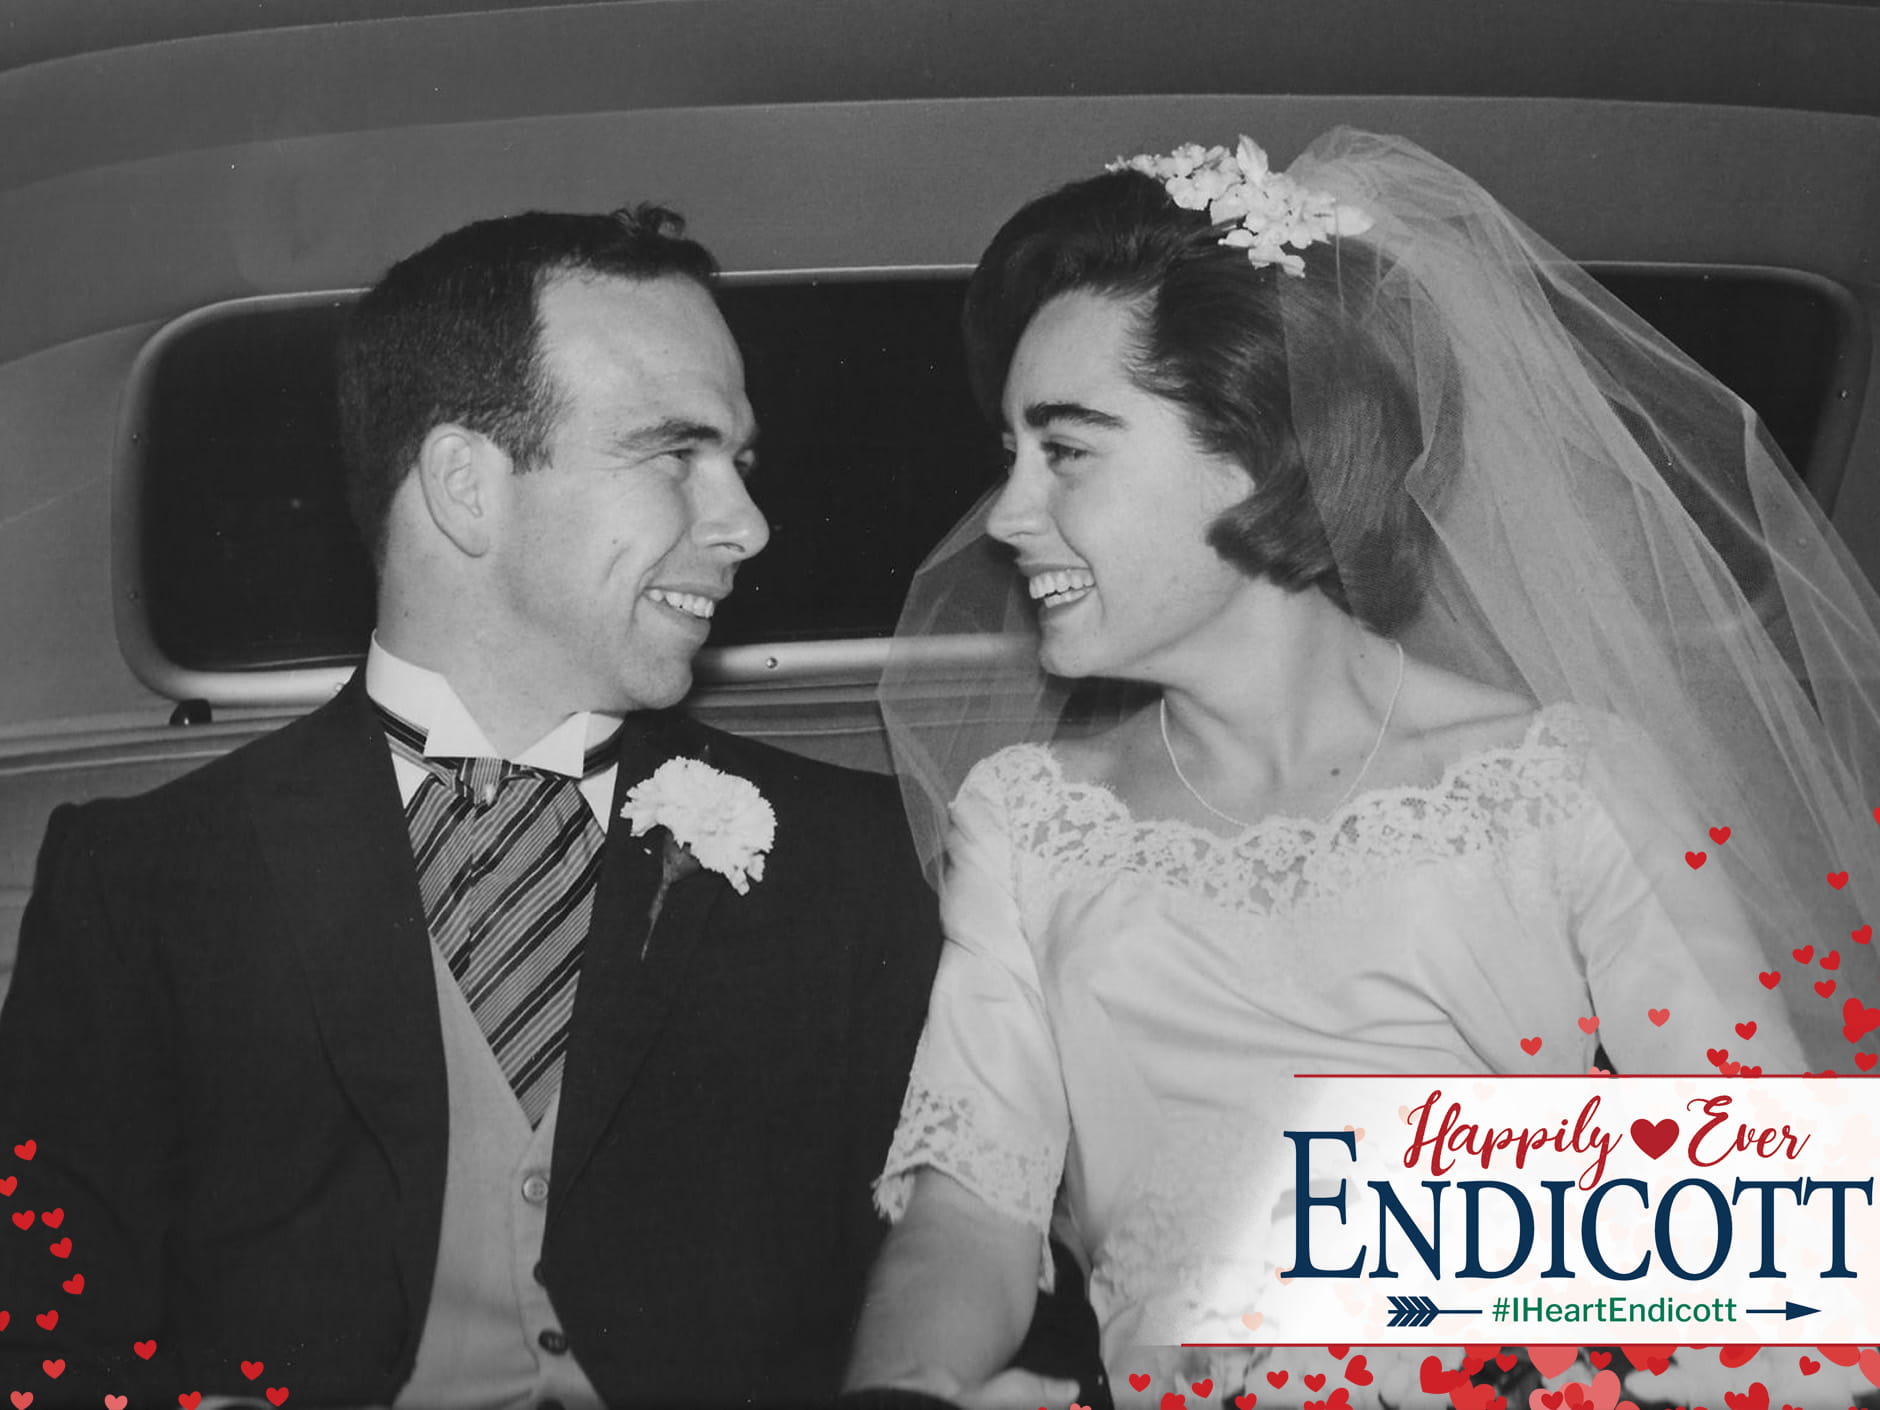 Two former Endicott students in wedding picture submitted to the Happily Ever Endicott story